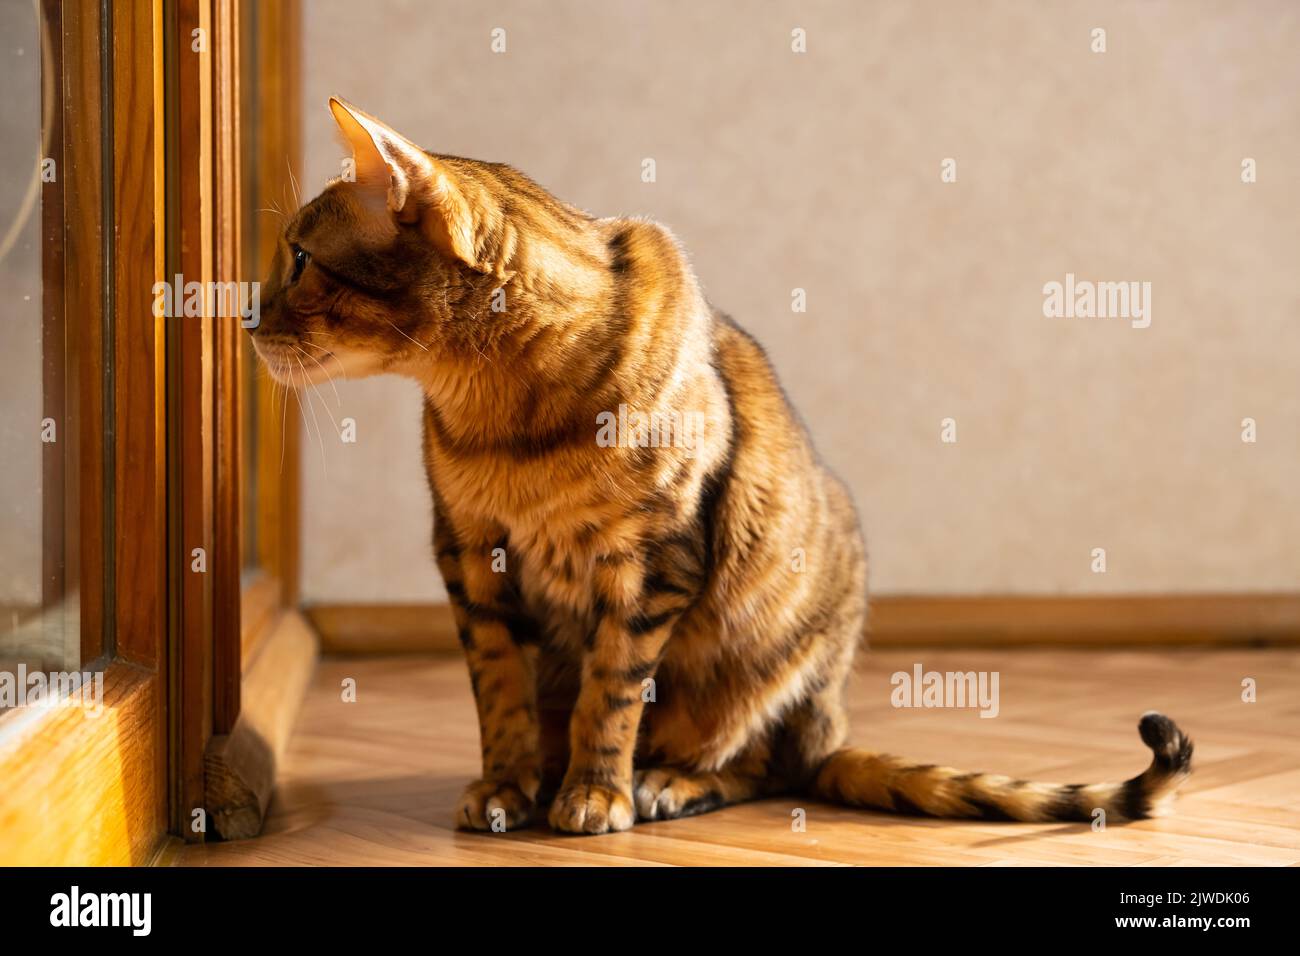 Sunny ginger cat. Cute domestic cat sitting in sunlight on balcony. Stock Photo